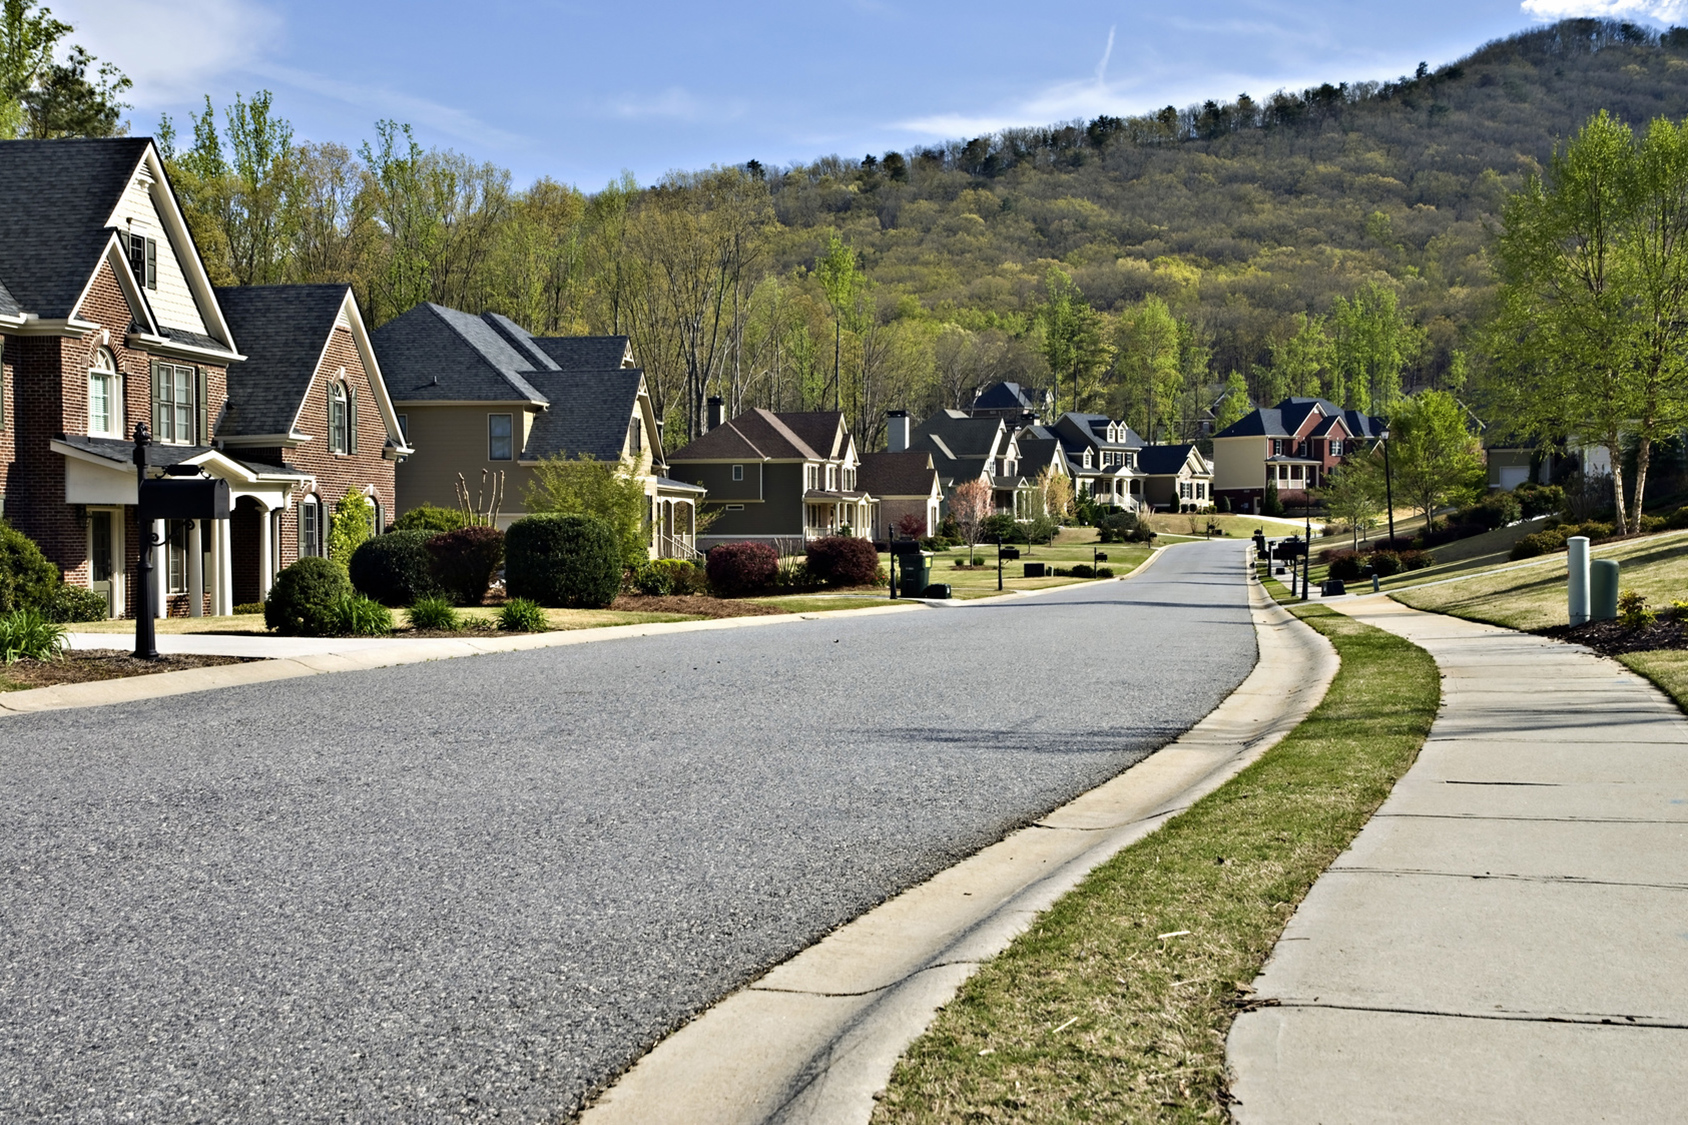 How to Choose a Neighborhood for Your Home Search